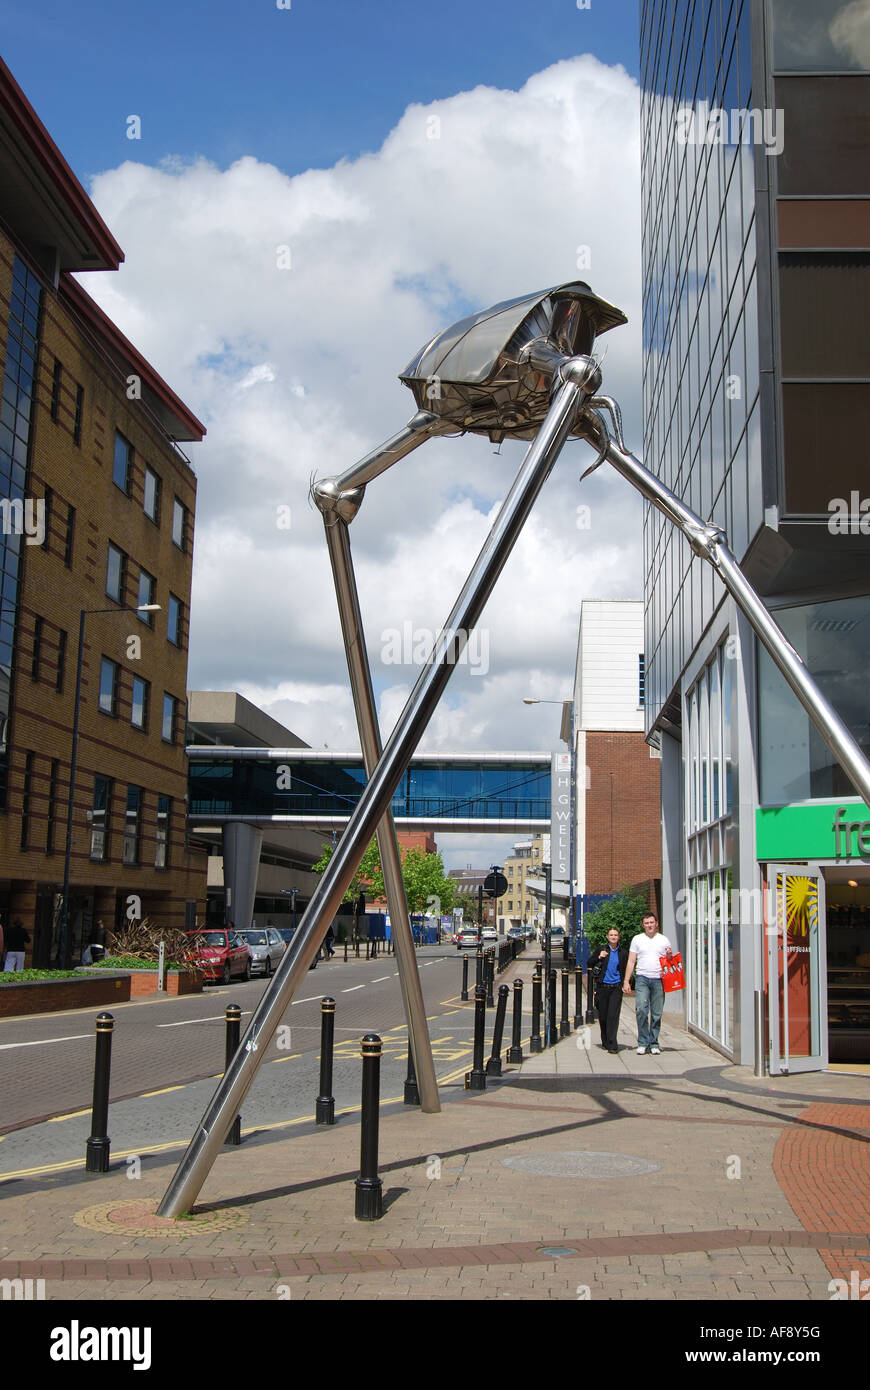 'War of the Worlds' Martian sculpture, Town centre, Woking, Surrey, England, United Kingdom Stock Photo